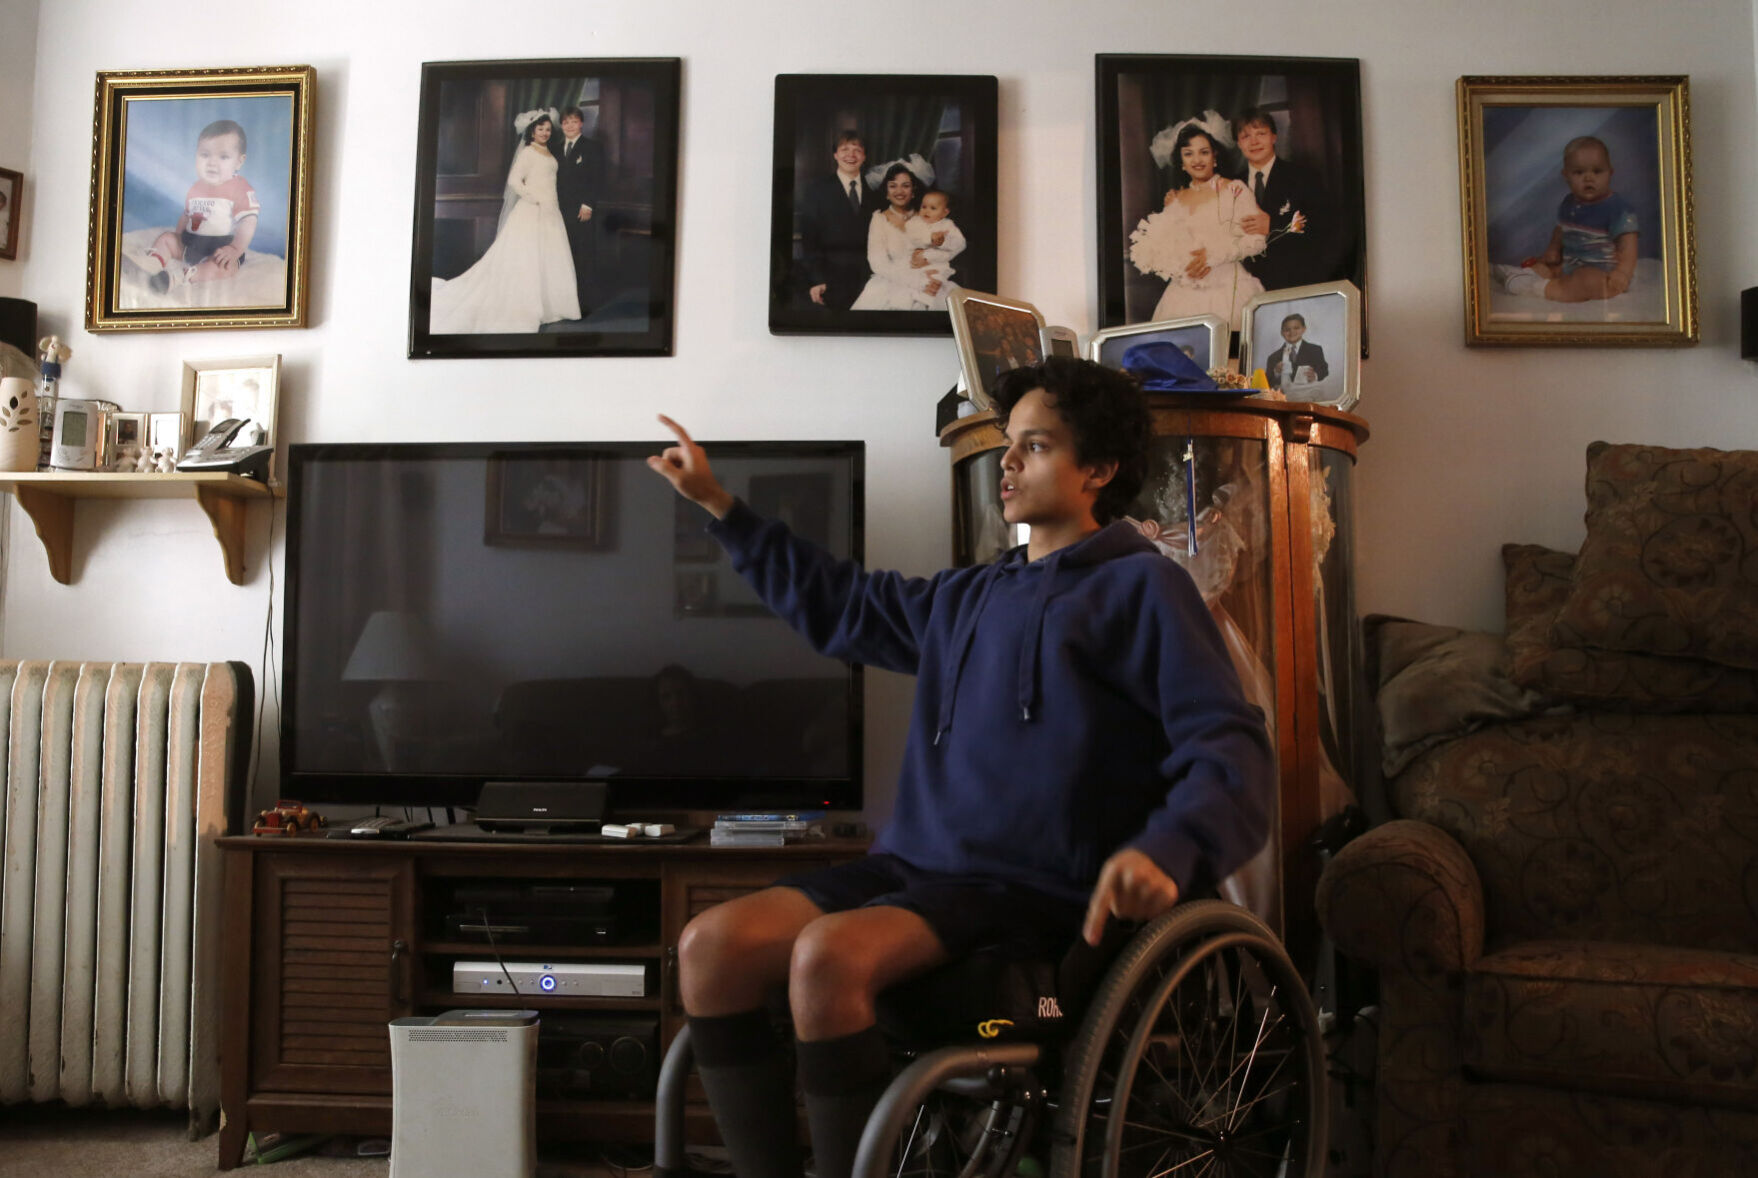 Resilience Story A bullet, a wheelchair, then perseverance Features postregister